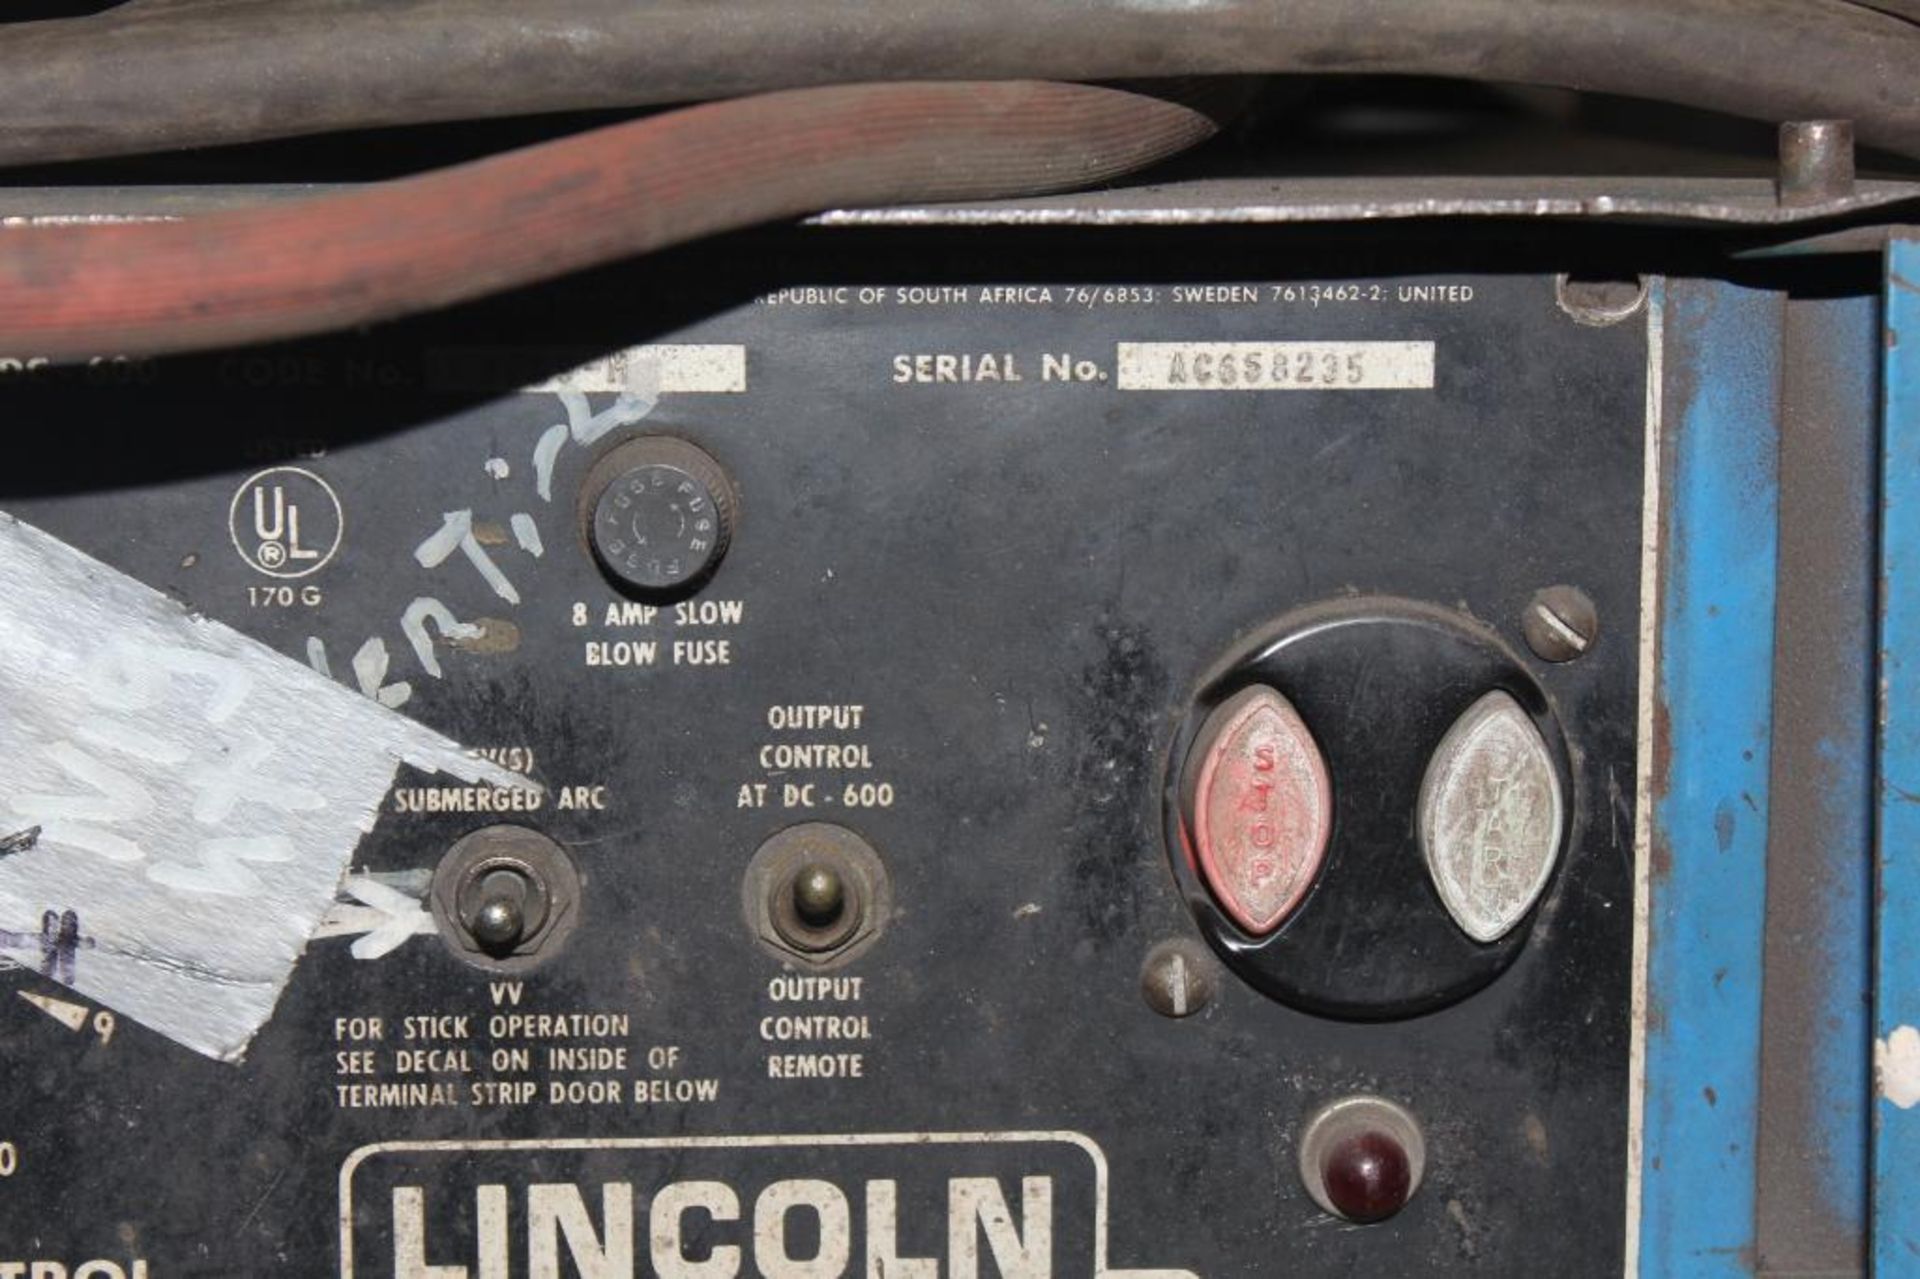 LINCOLN ELECTRIC IDEALARC DC-600 WELDER SN.AC658235 230-460V WITH LN-8 WIRE FEED SN.57089 115V - Image 10 of 10